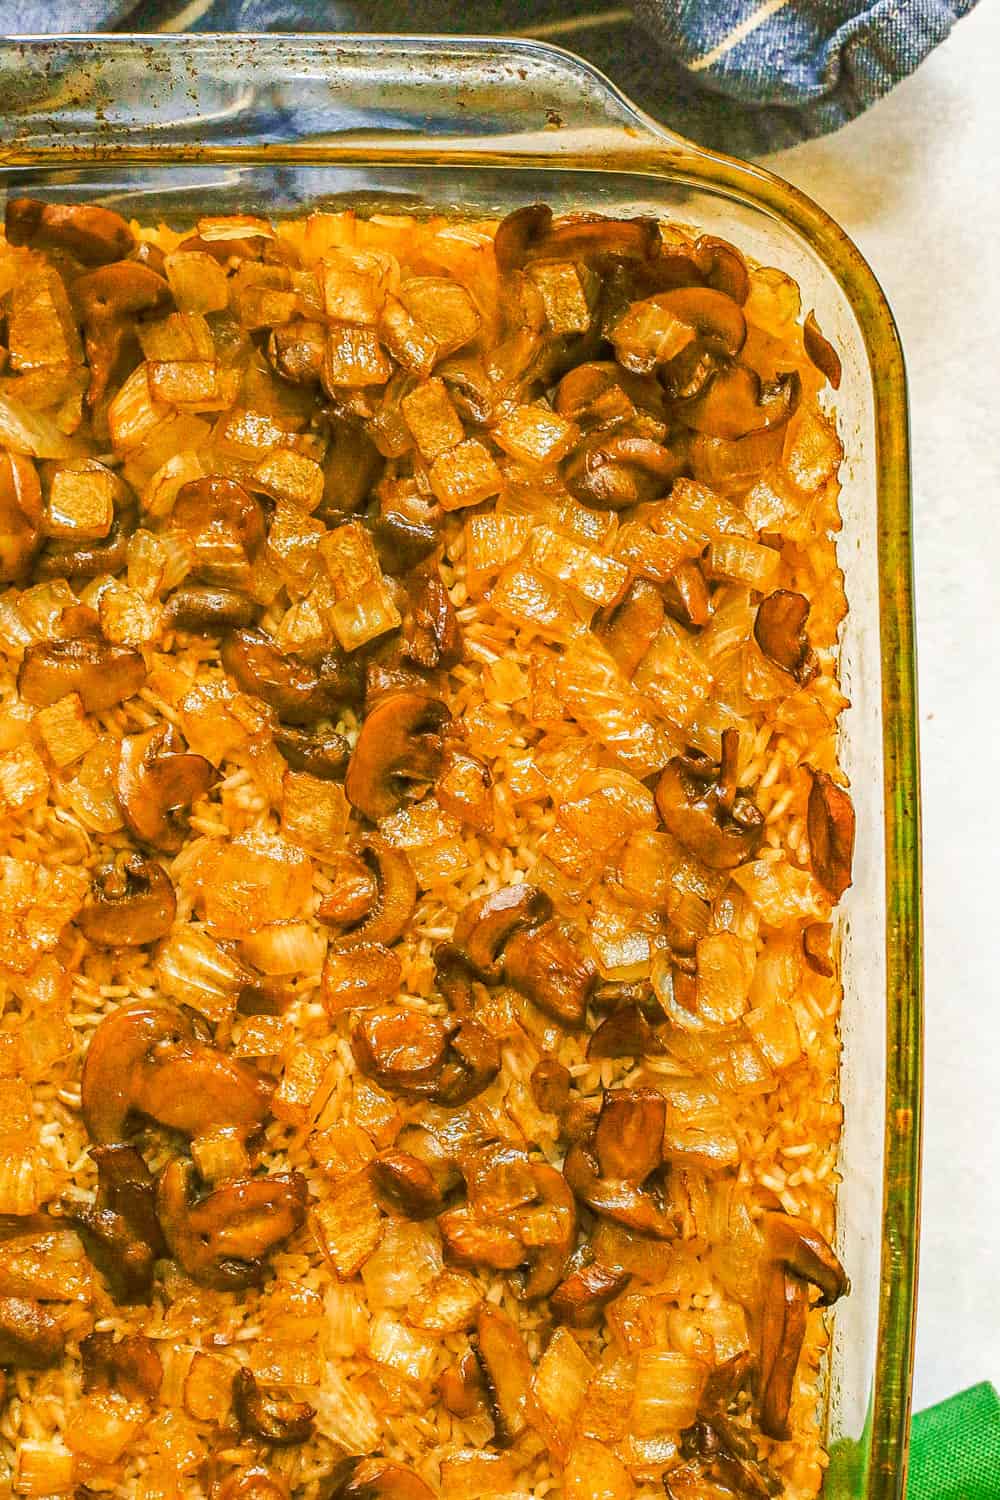 A baked rice casserole with mushrooms and onions in a large glass baking dish